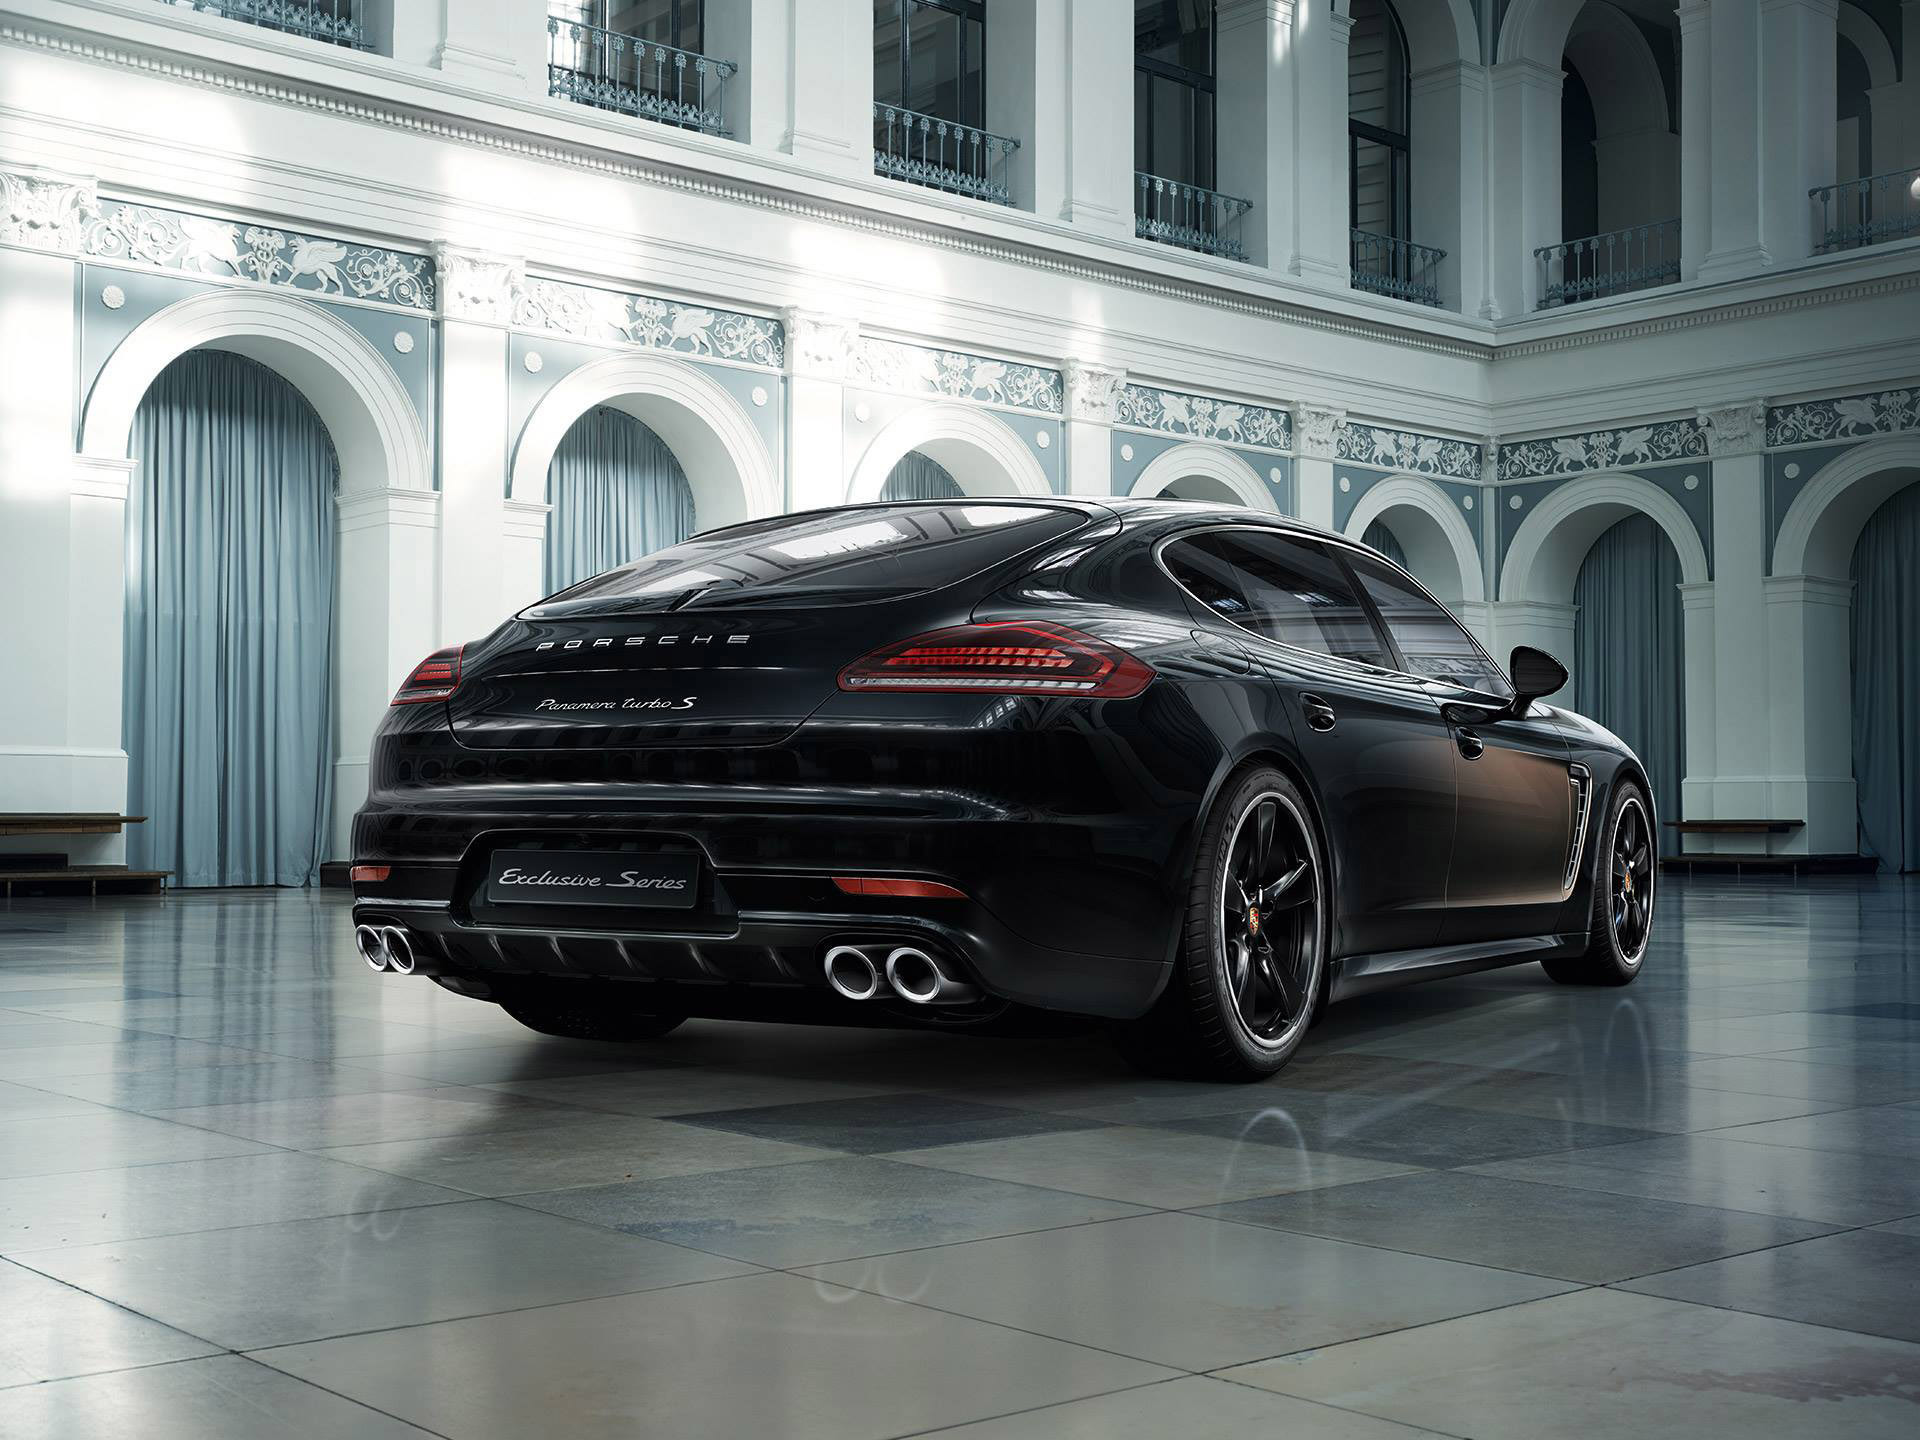 back view, porsche, cars, rear view, panamera, turbo s, exclusive